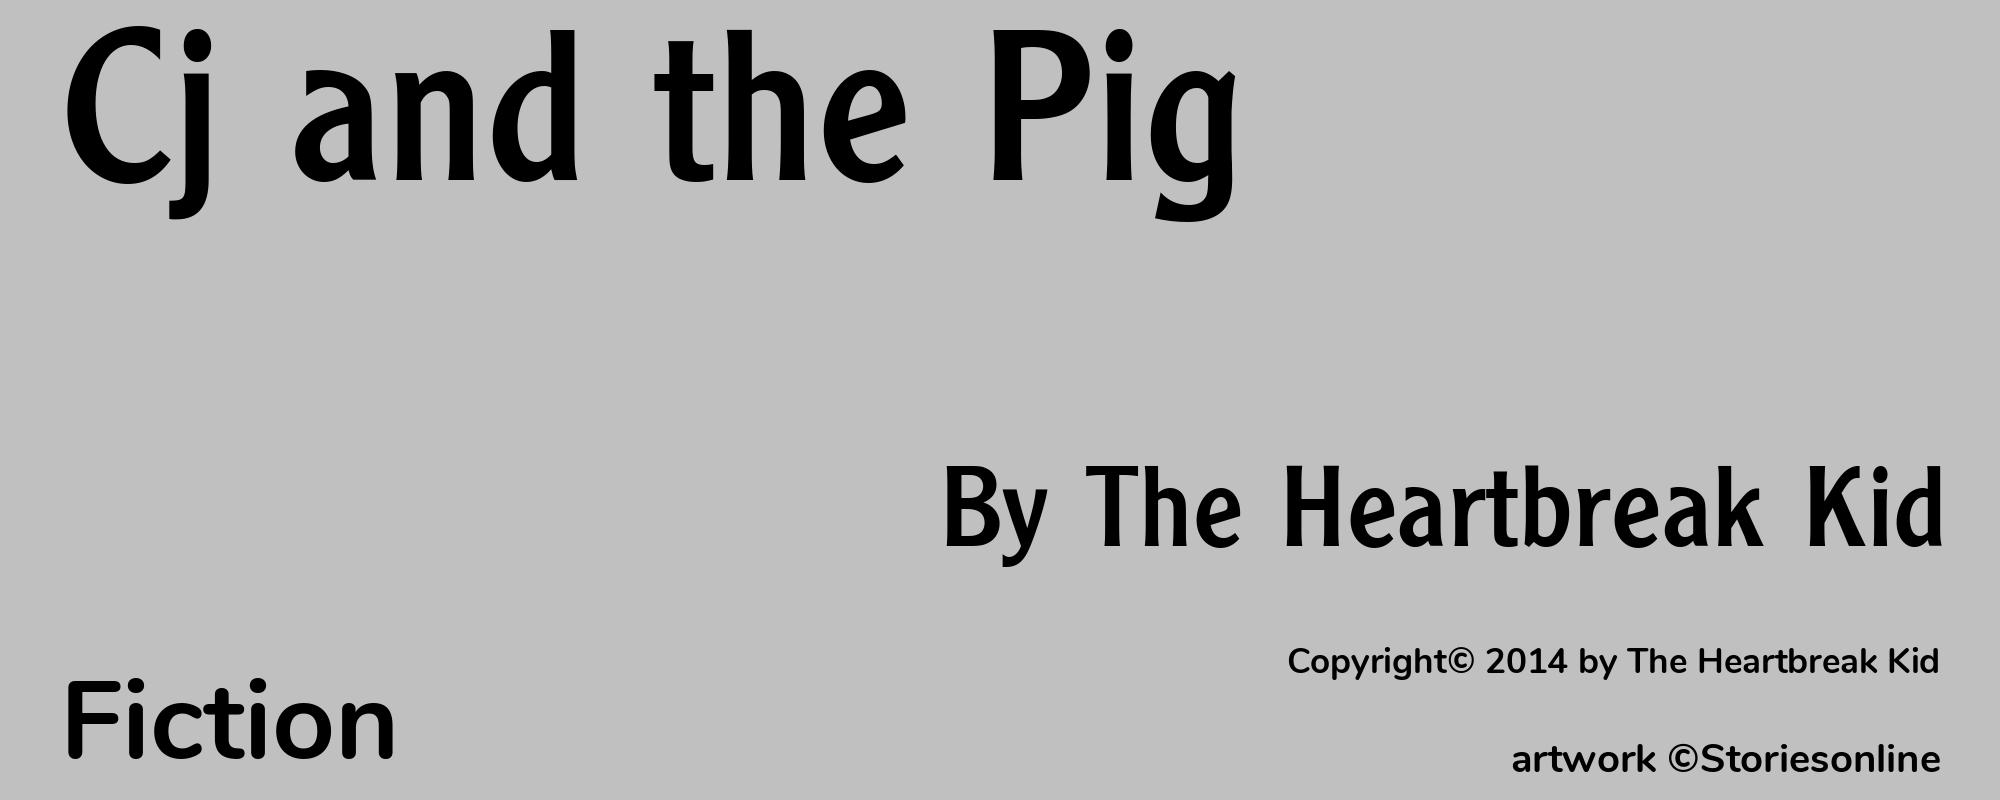 Cj and the Pig - Cover